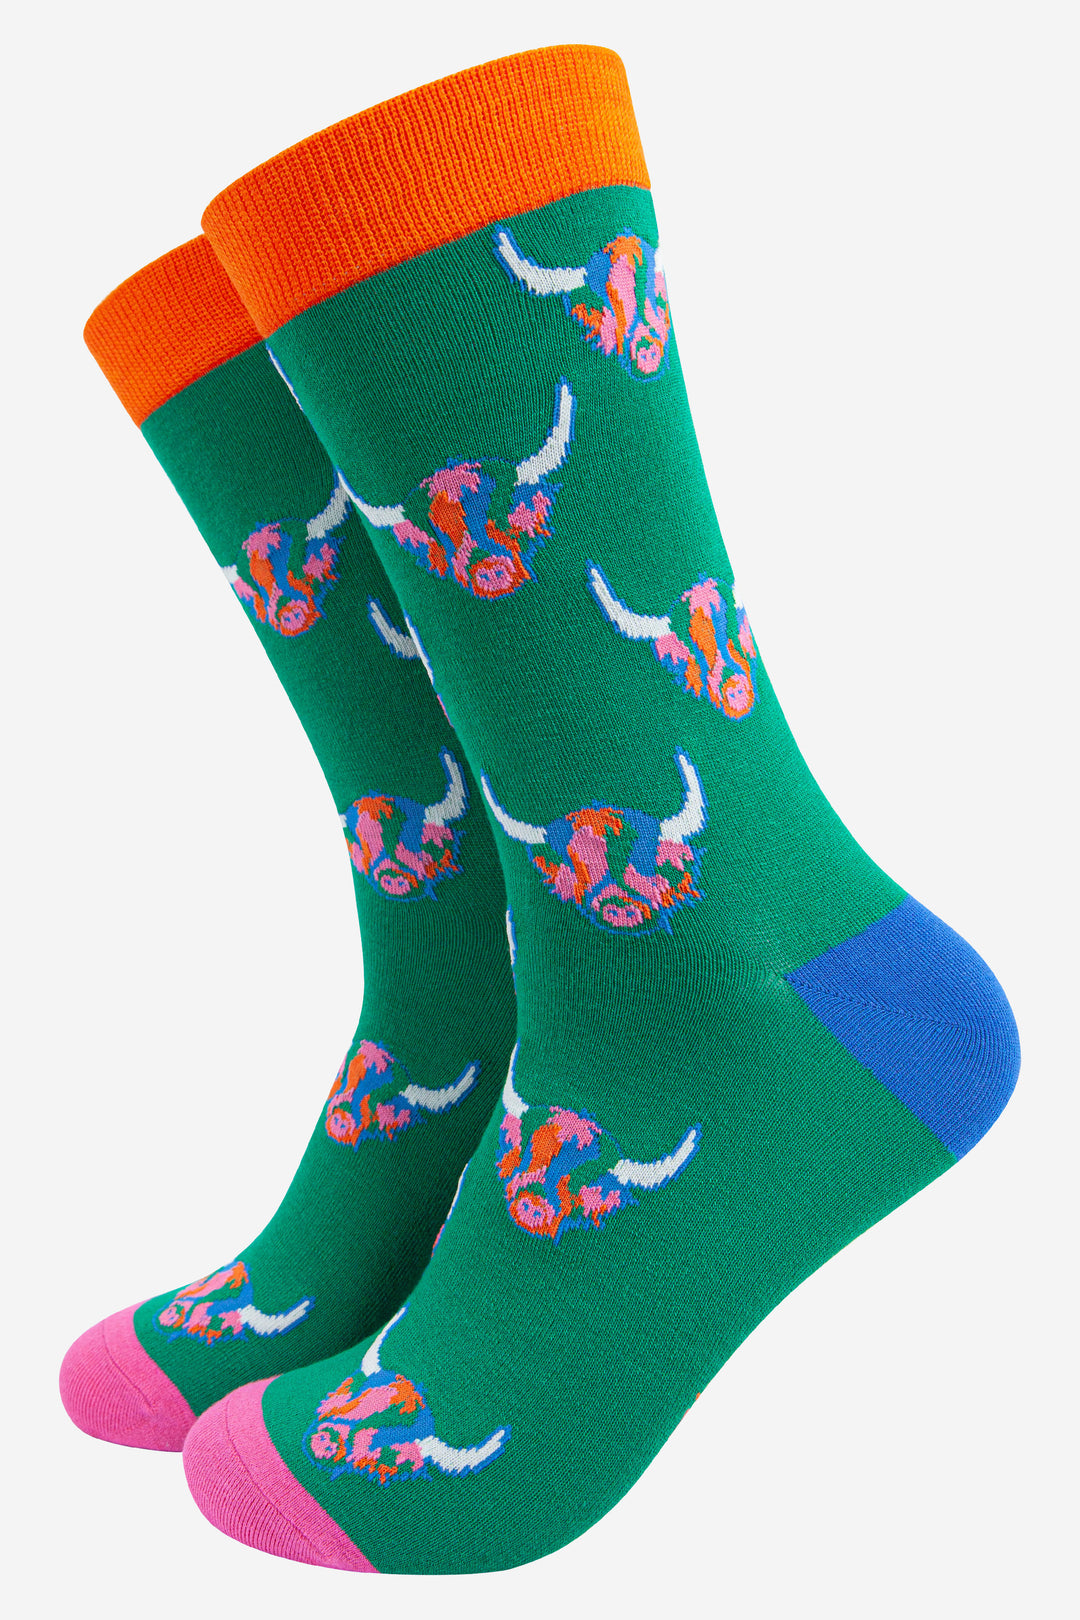 green socks with a pattern of rainbow highland cows